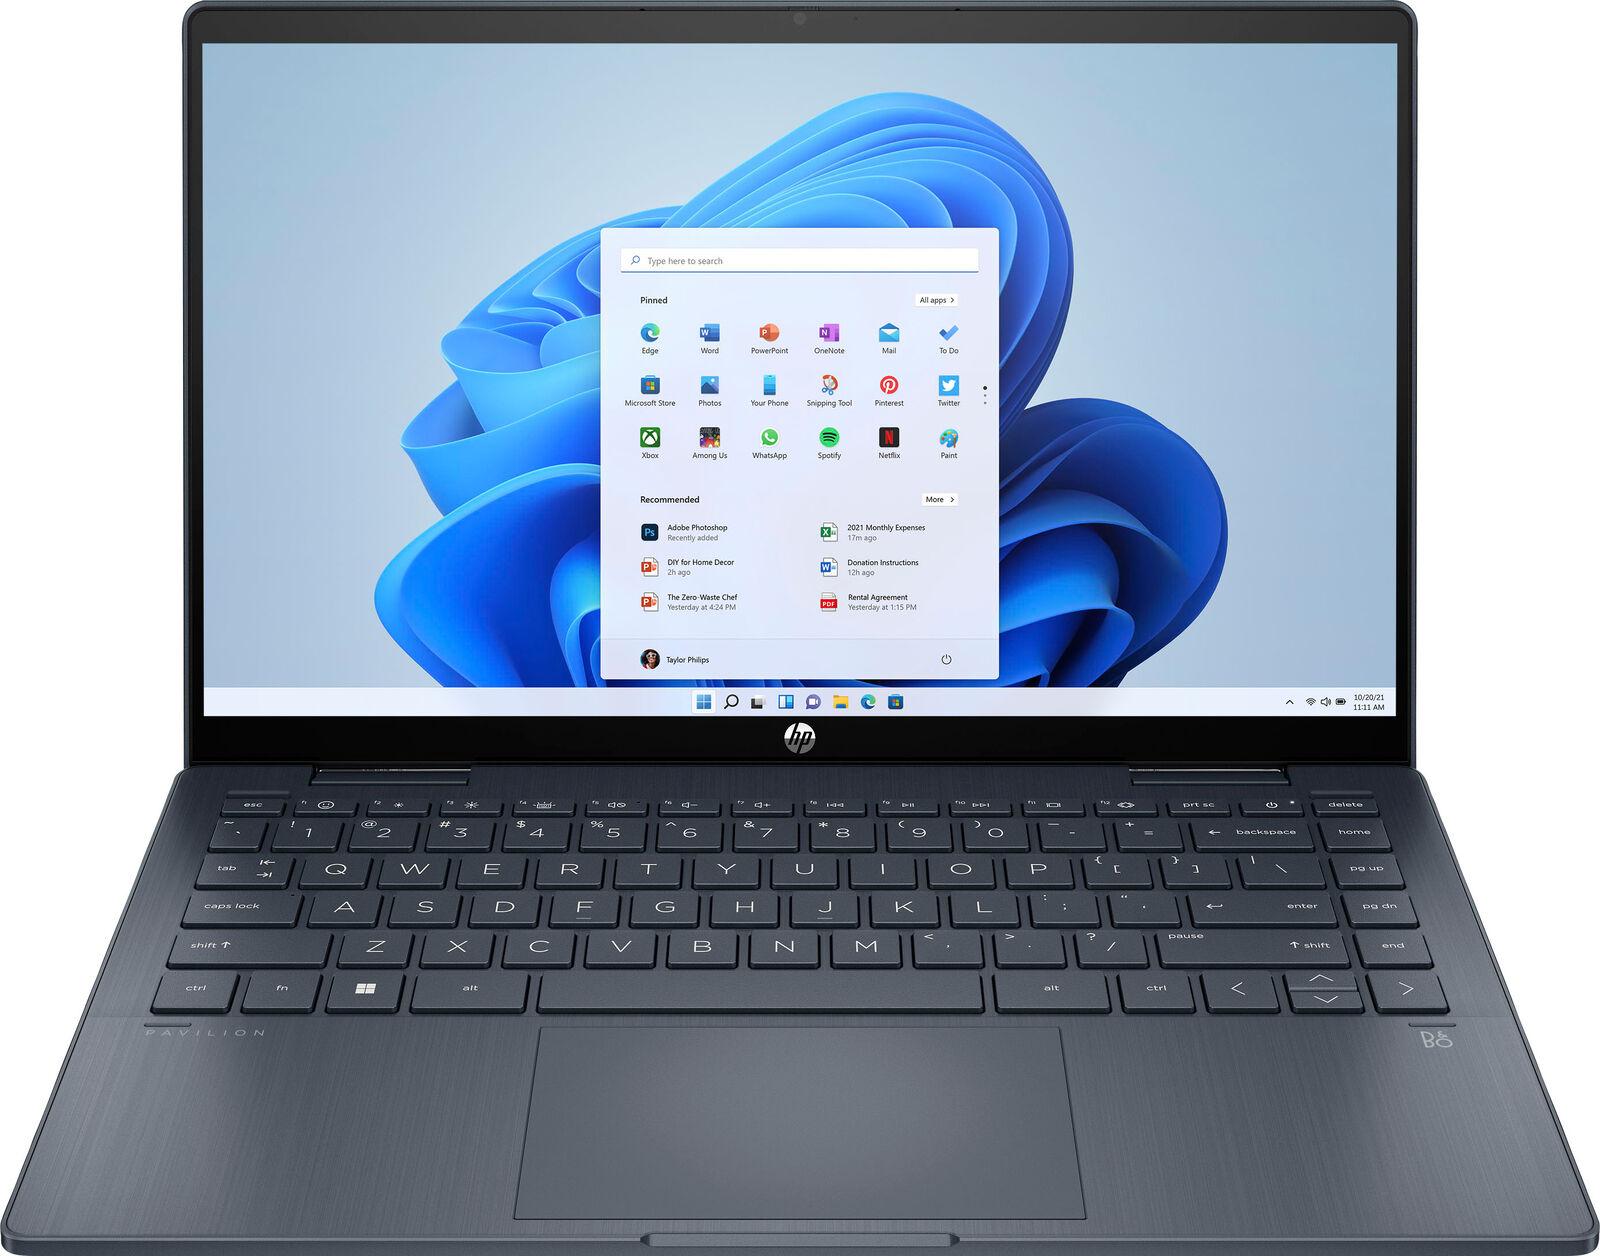 HP Pavilion x360 2-in-1 14in i3 8GB 256GB Notebook Laptop for $379.99 Shipped